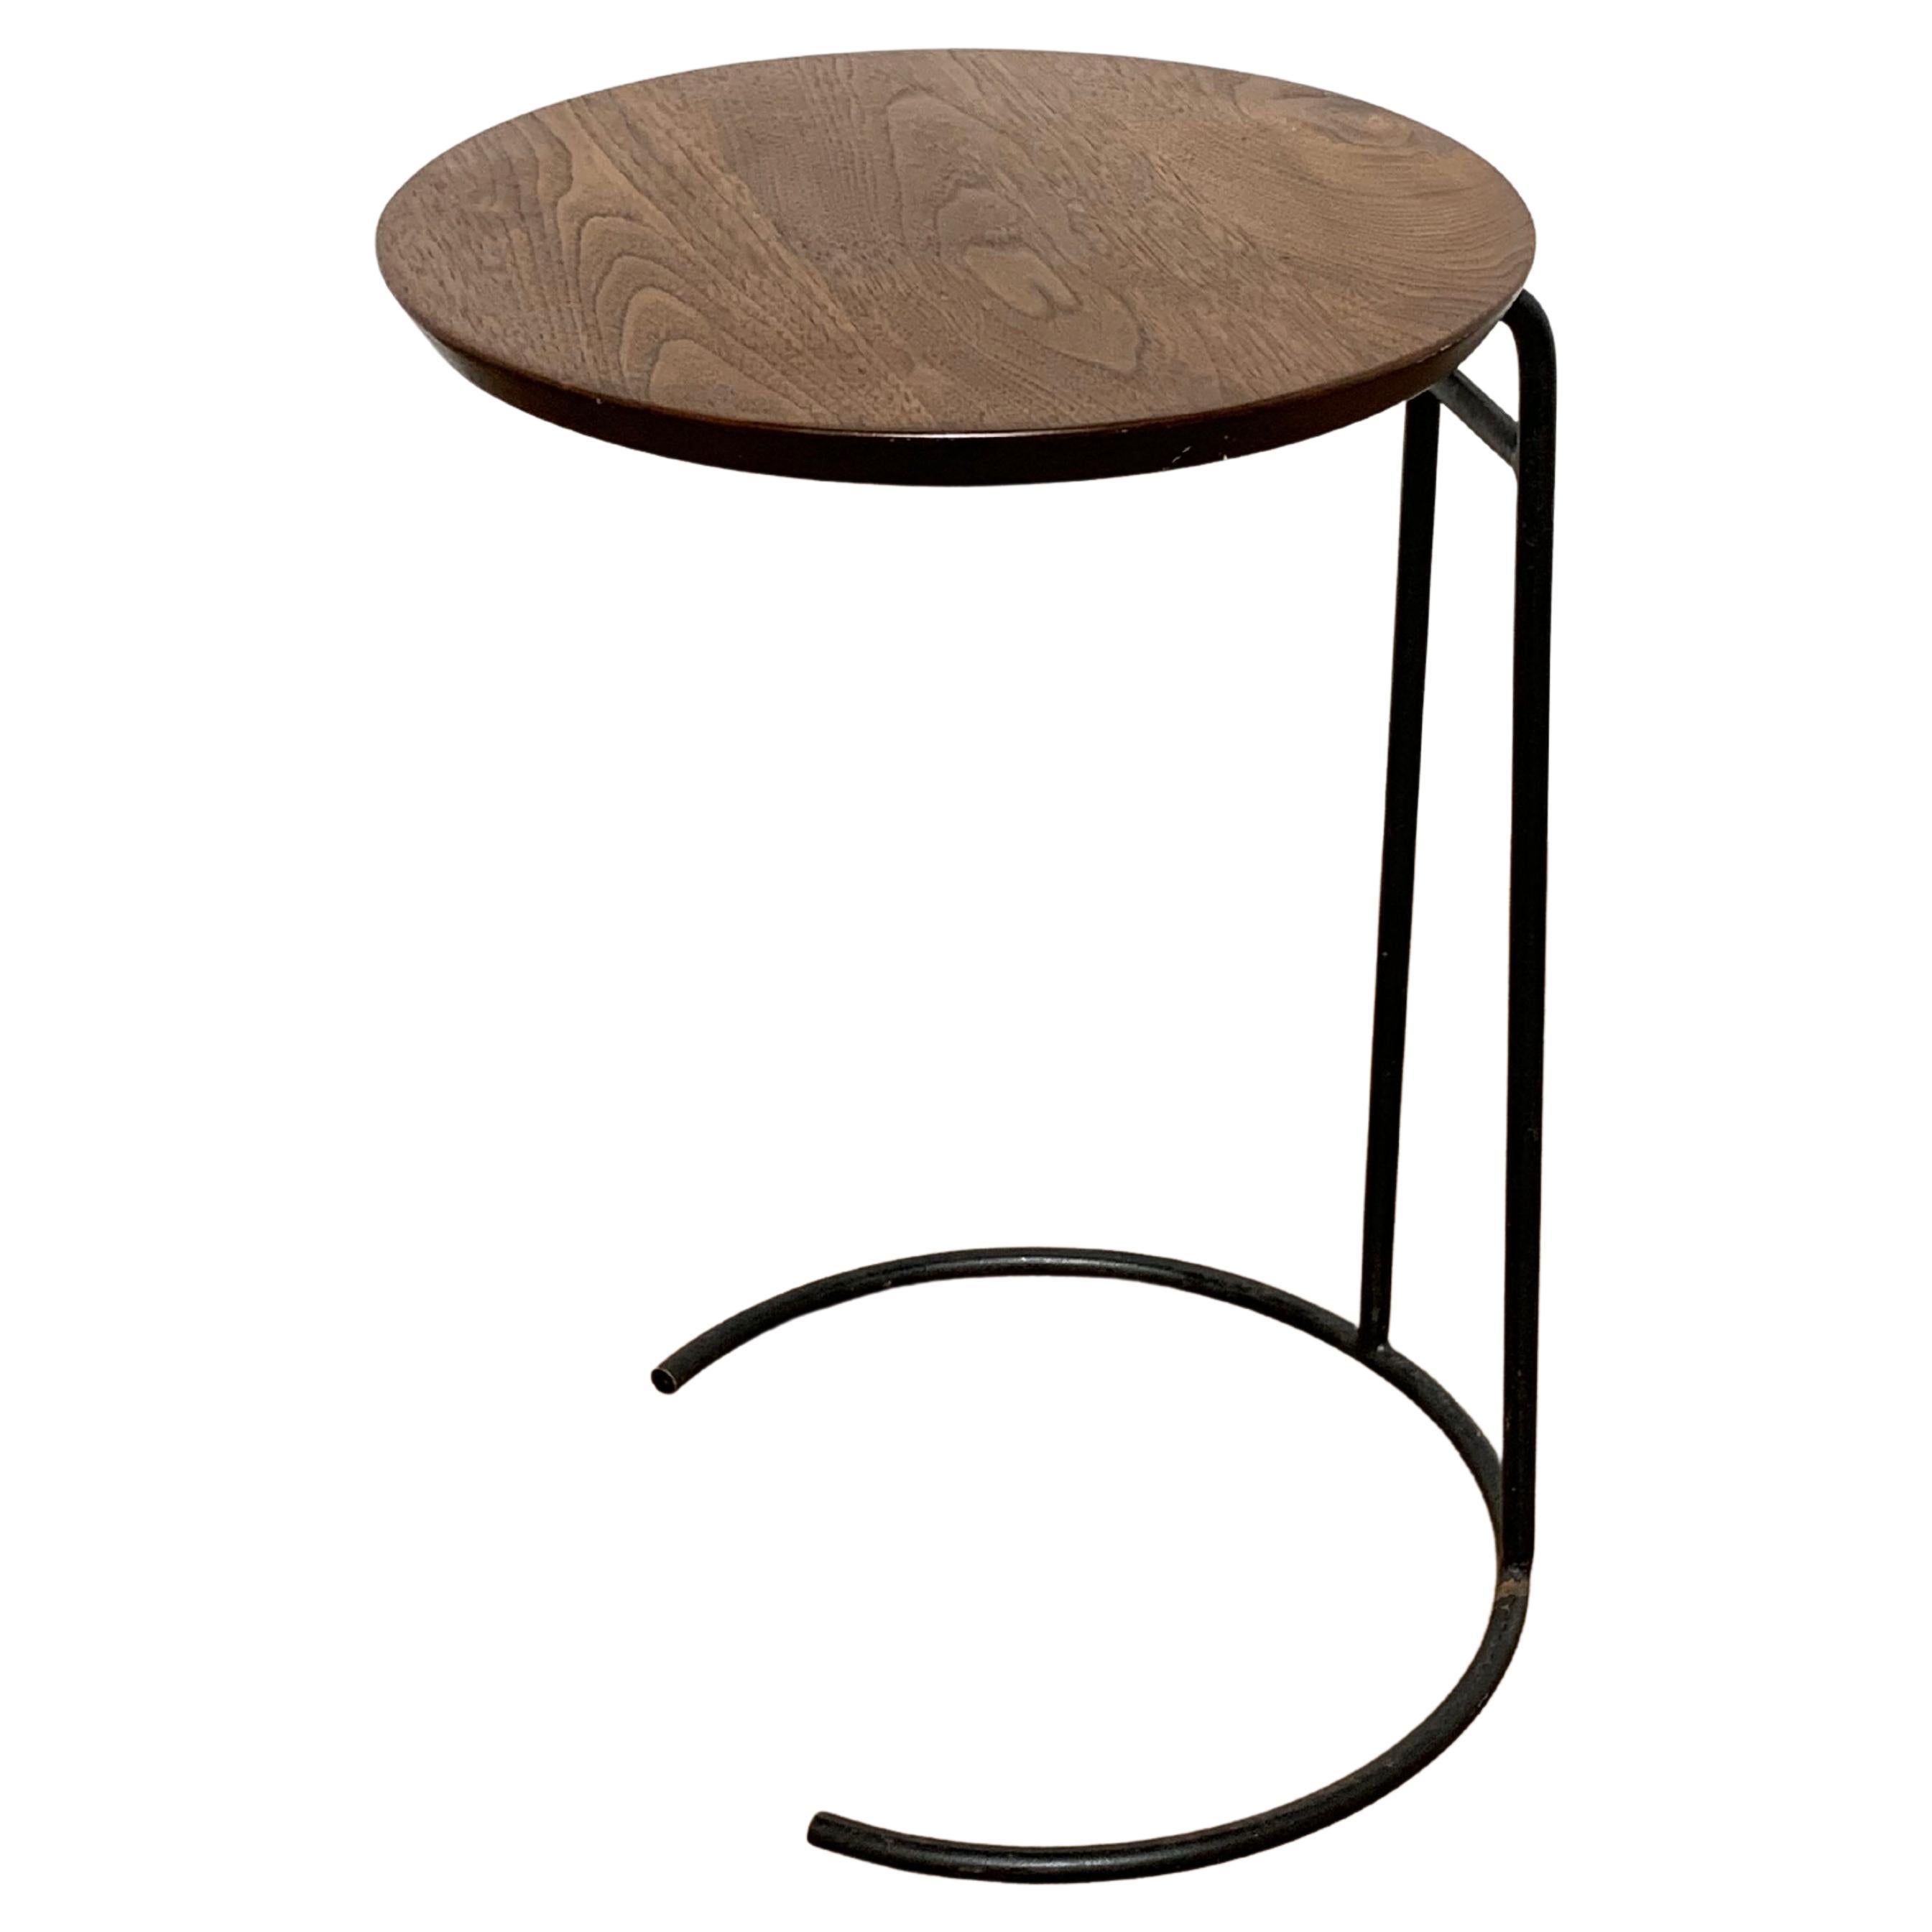 Signed Jens Risom T710 Side Table in Walnut and Steel circa 1950s